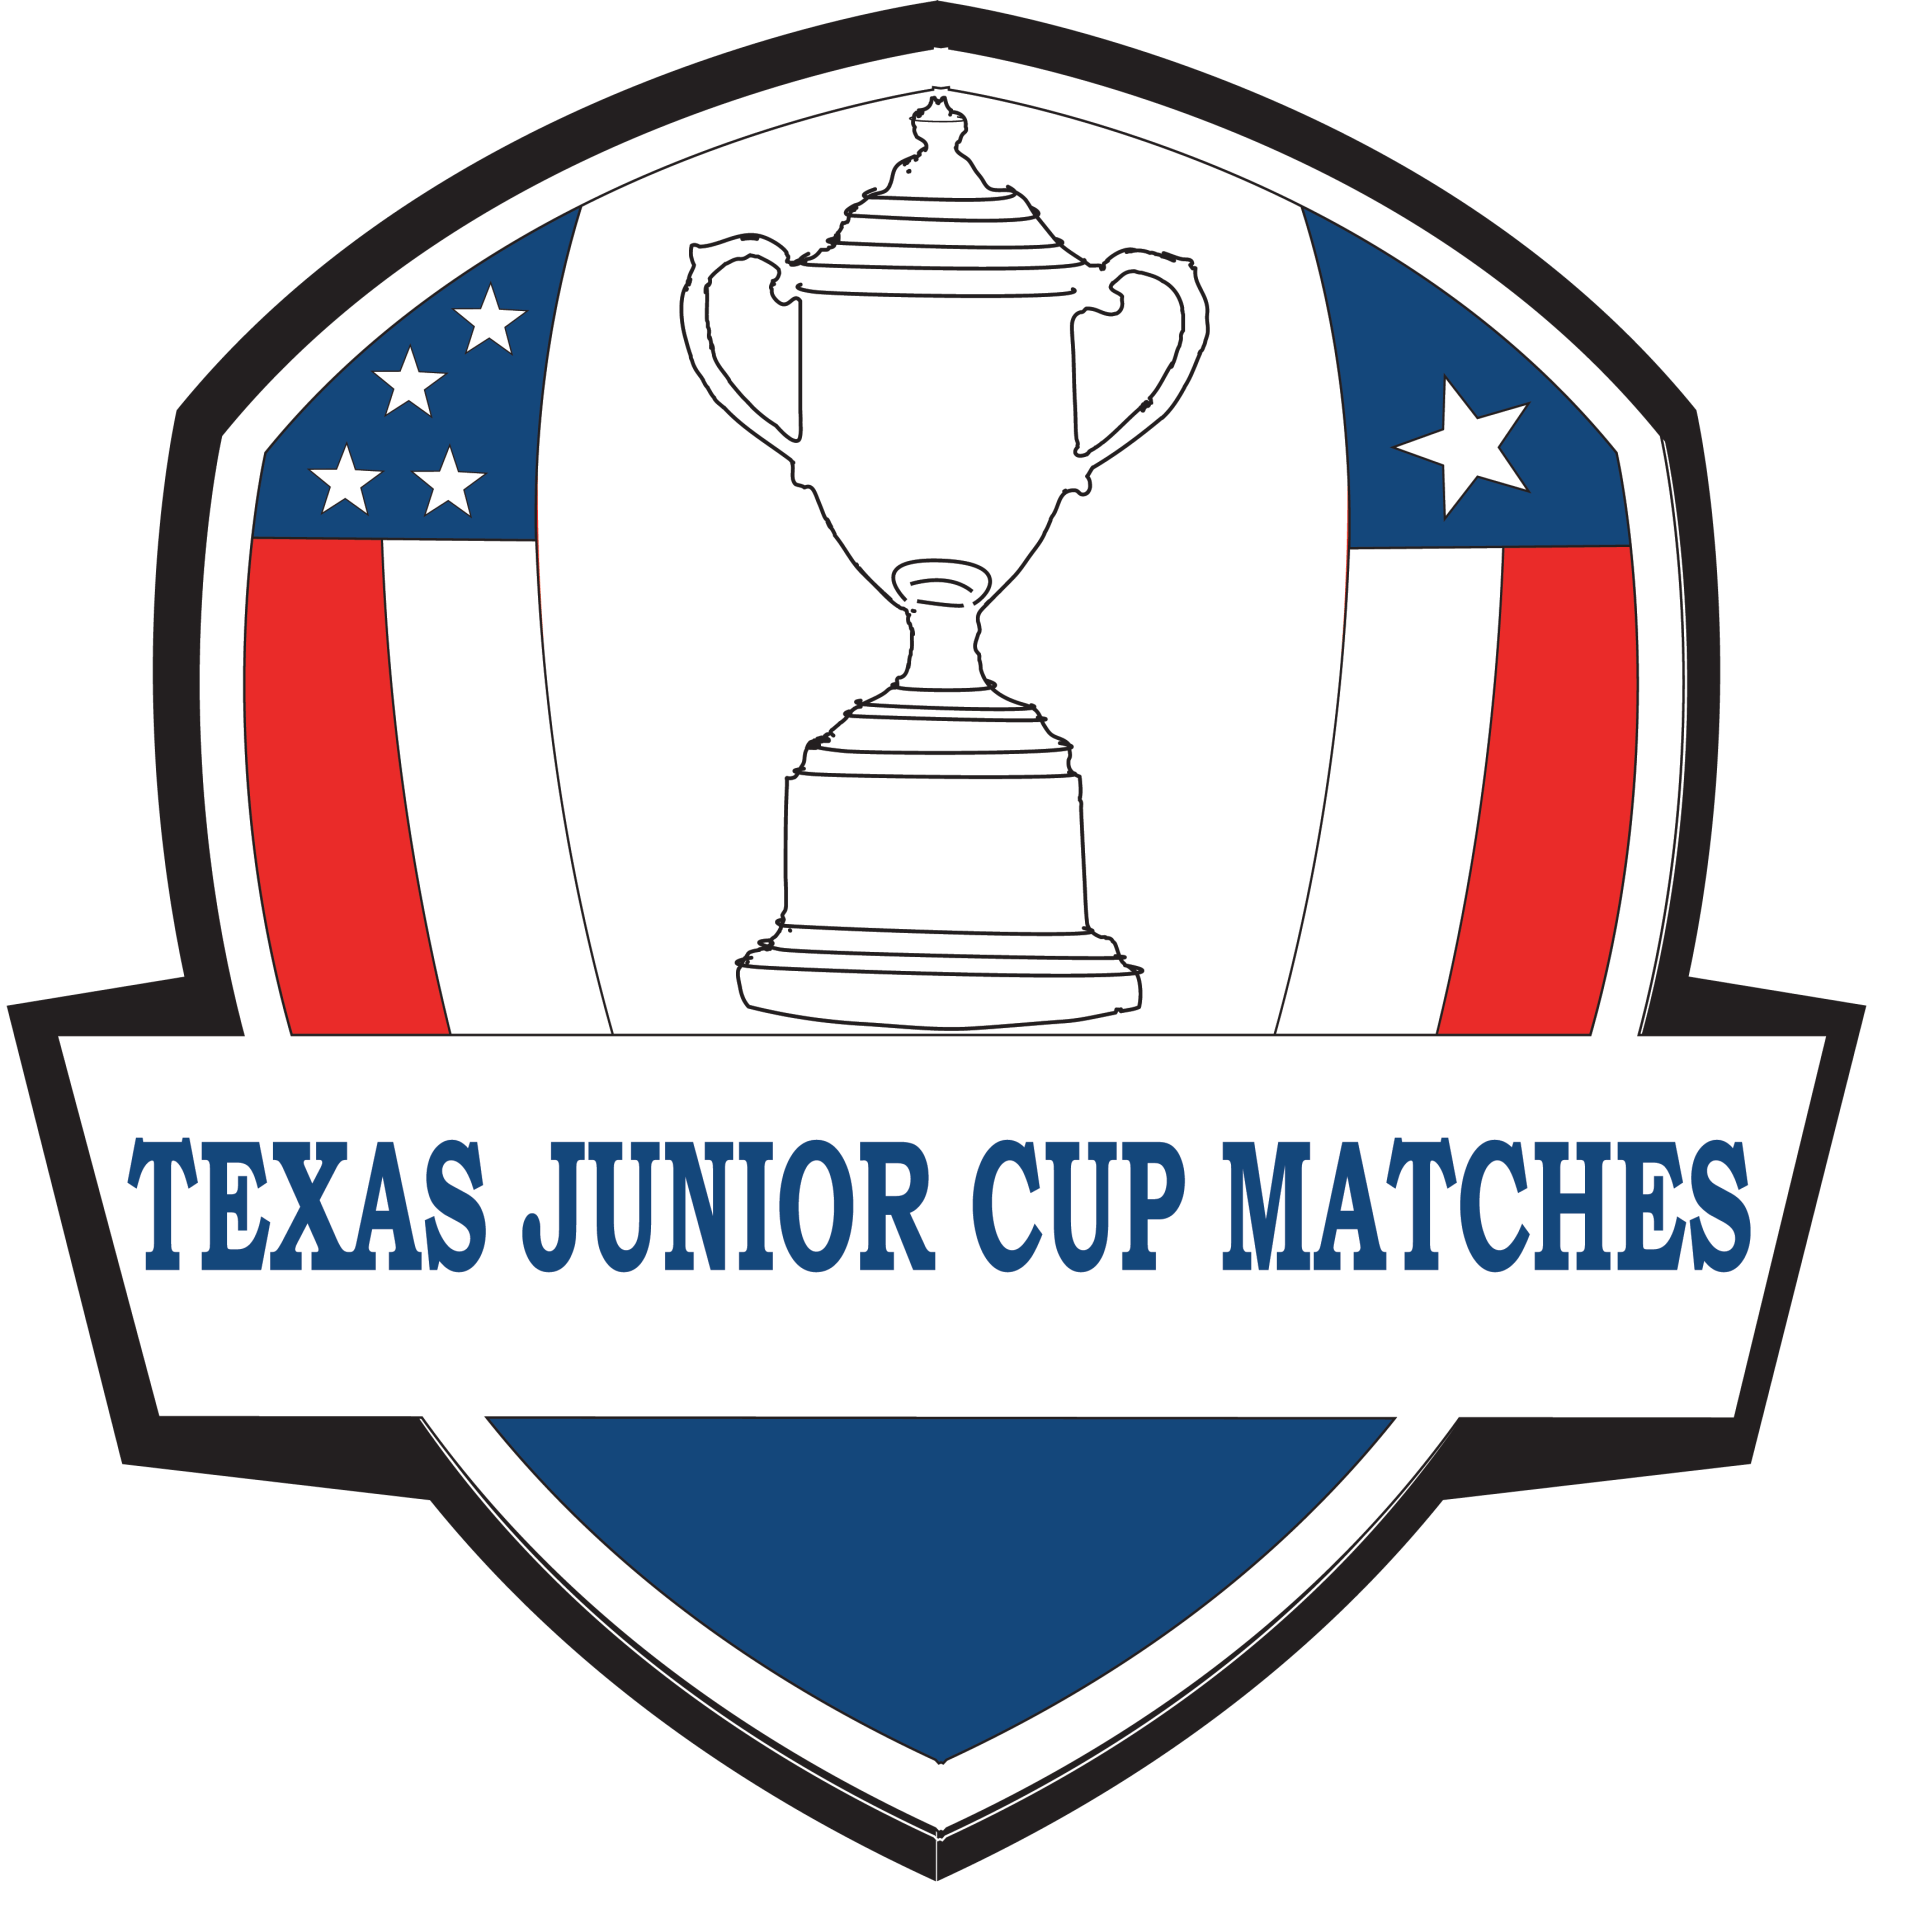 Texas Junior Cup Matches